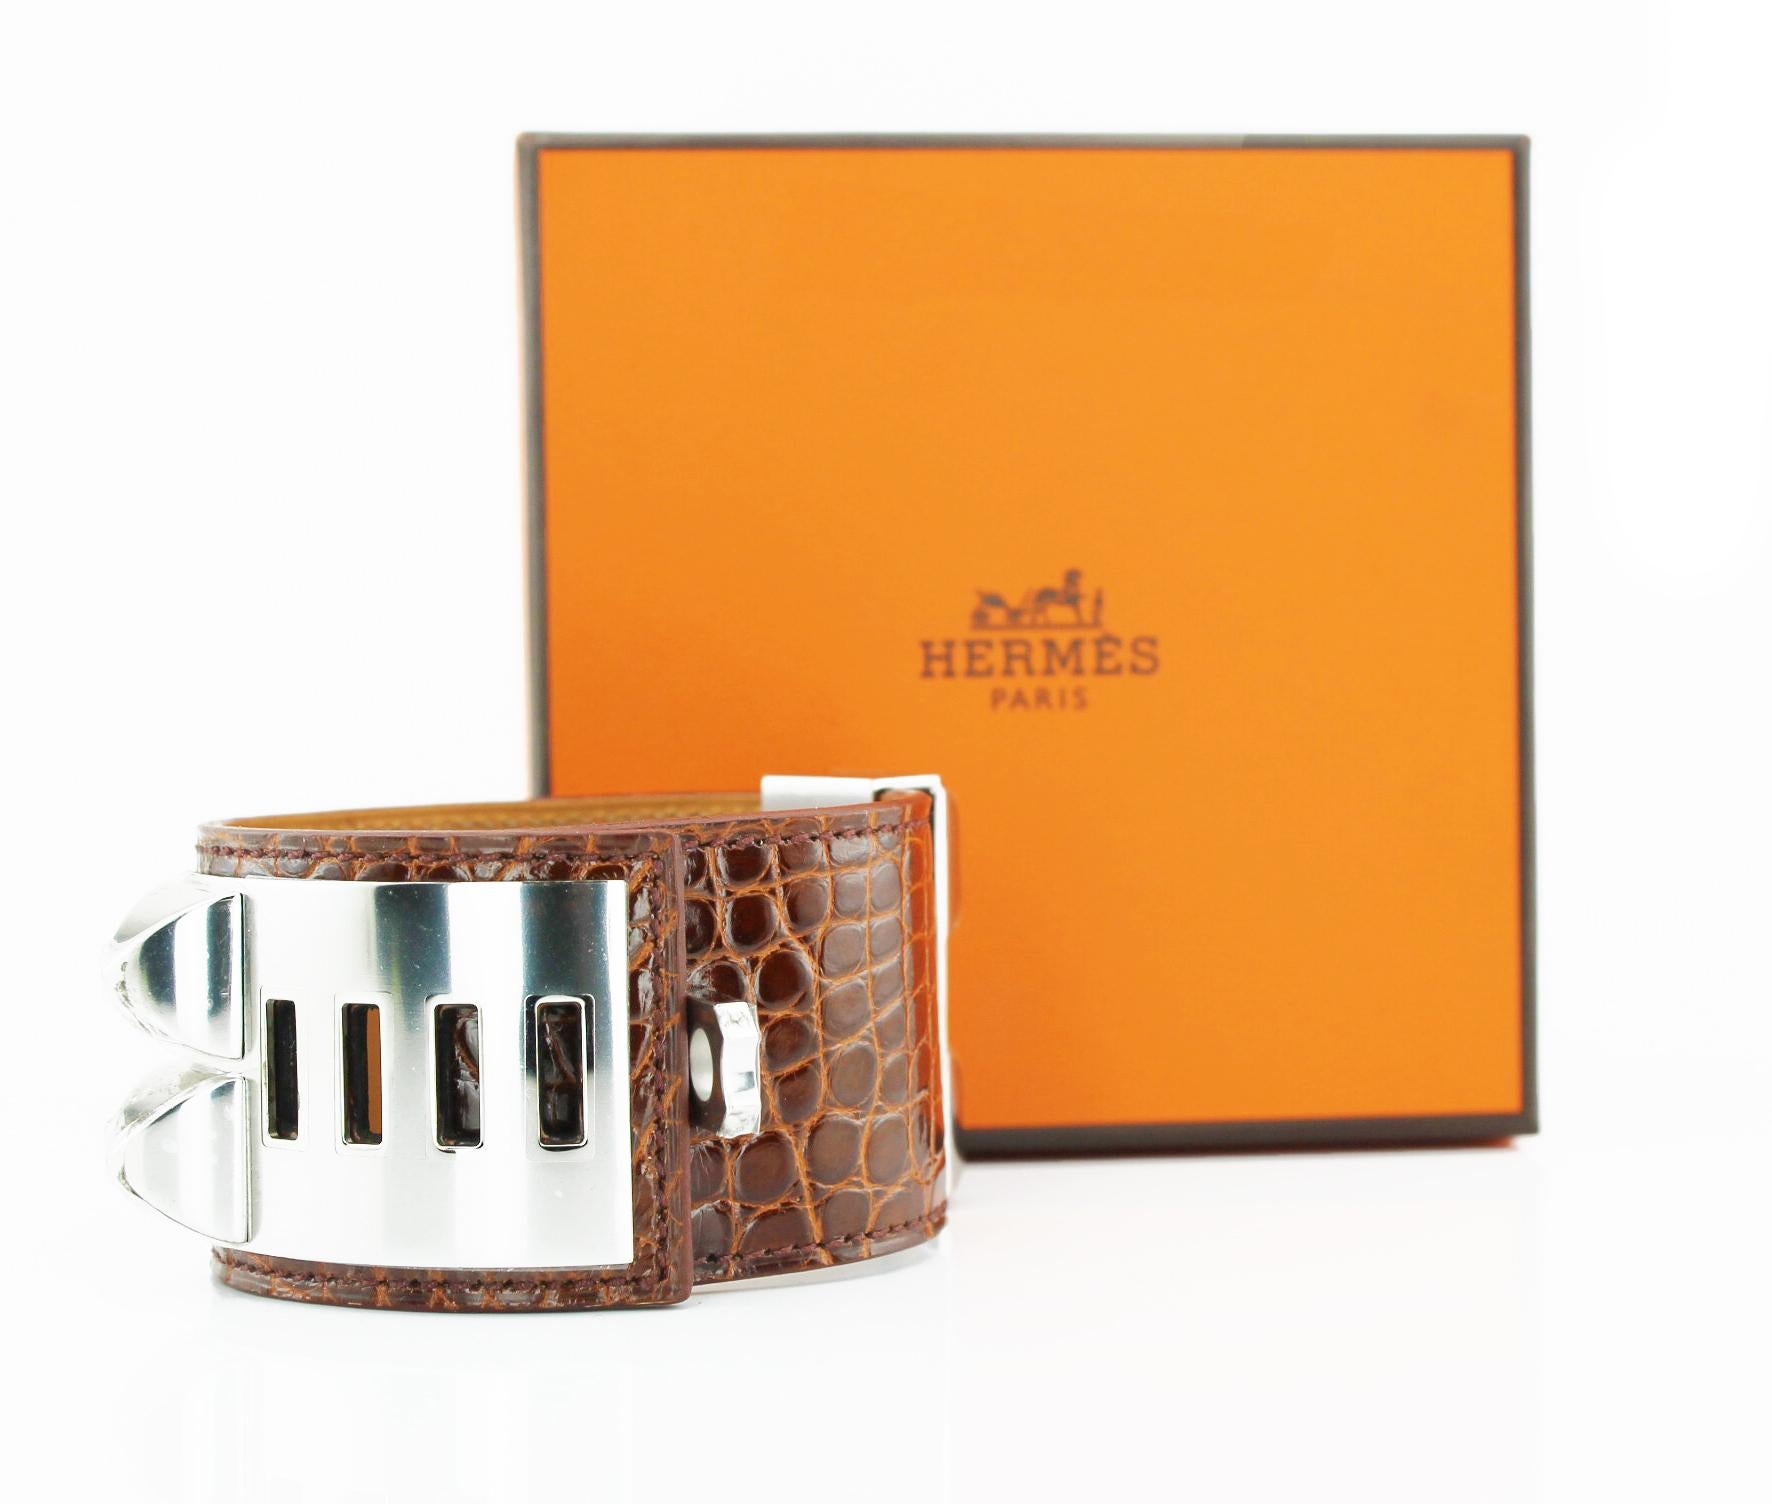 Hermes Collier De Chien Crocodile Cuff
Brown crocodile cuff with palladium pyramid studs and ring
New with stickers.
Original pouch and box
Size: Small
RRP £1,700